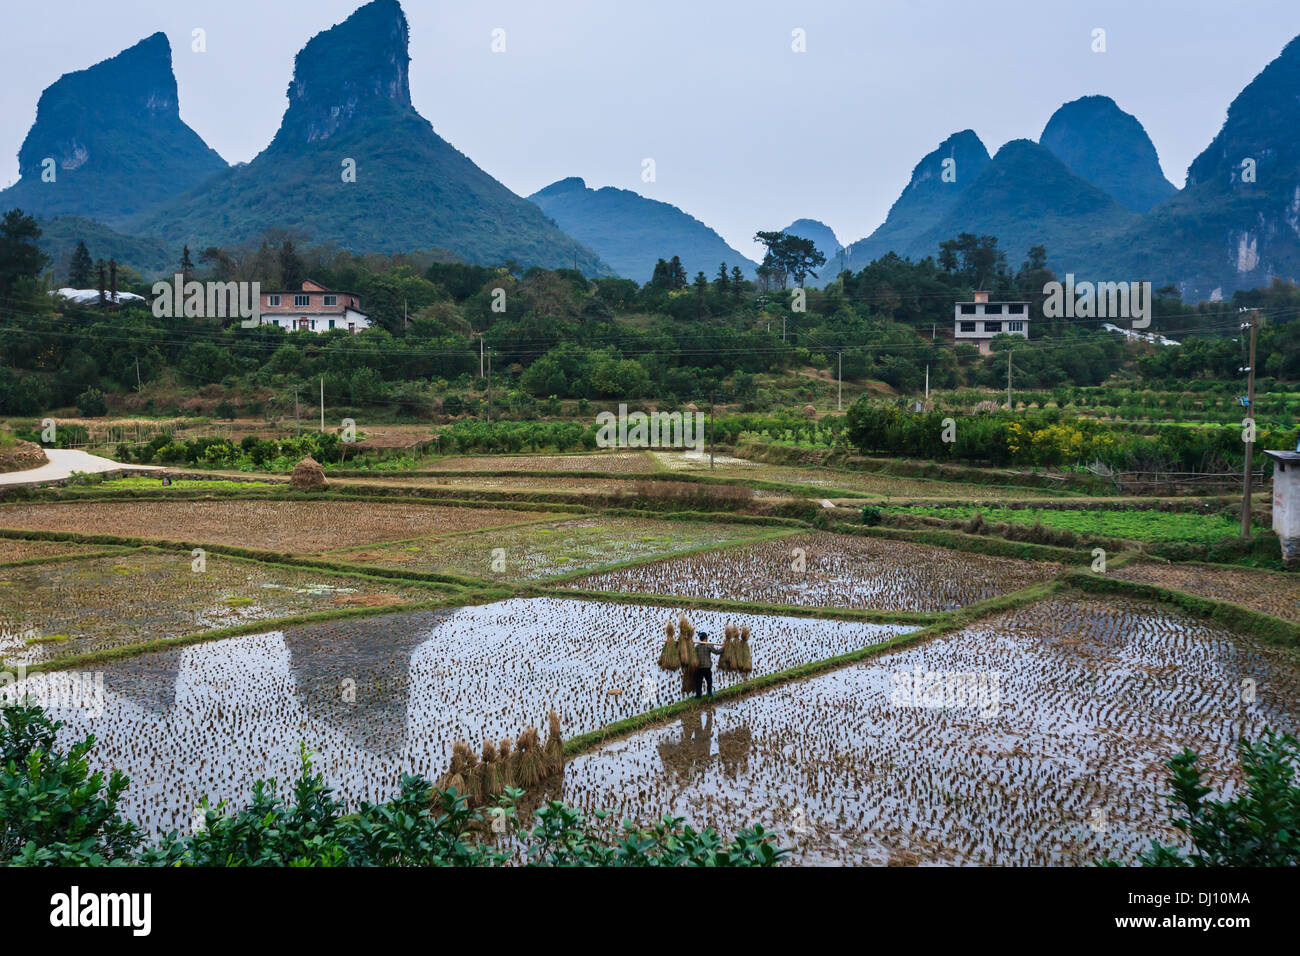 Chinese woman carrying rice stalks across the rice paddies with Karst mountain formations in background in Yangshao Stock Photo